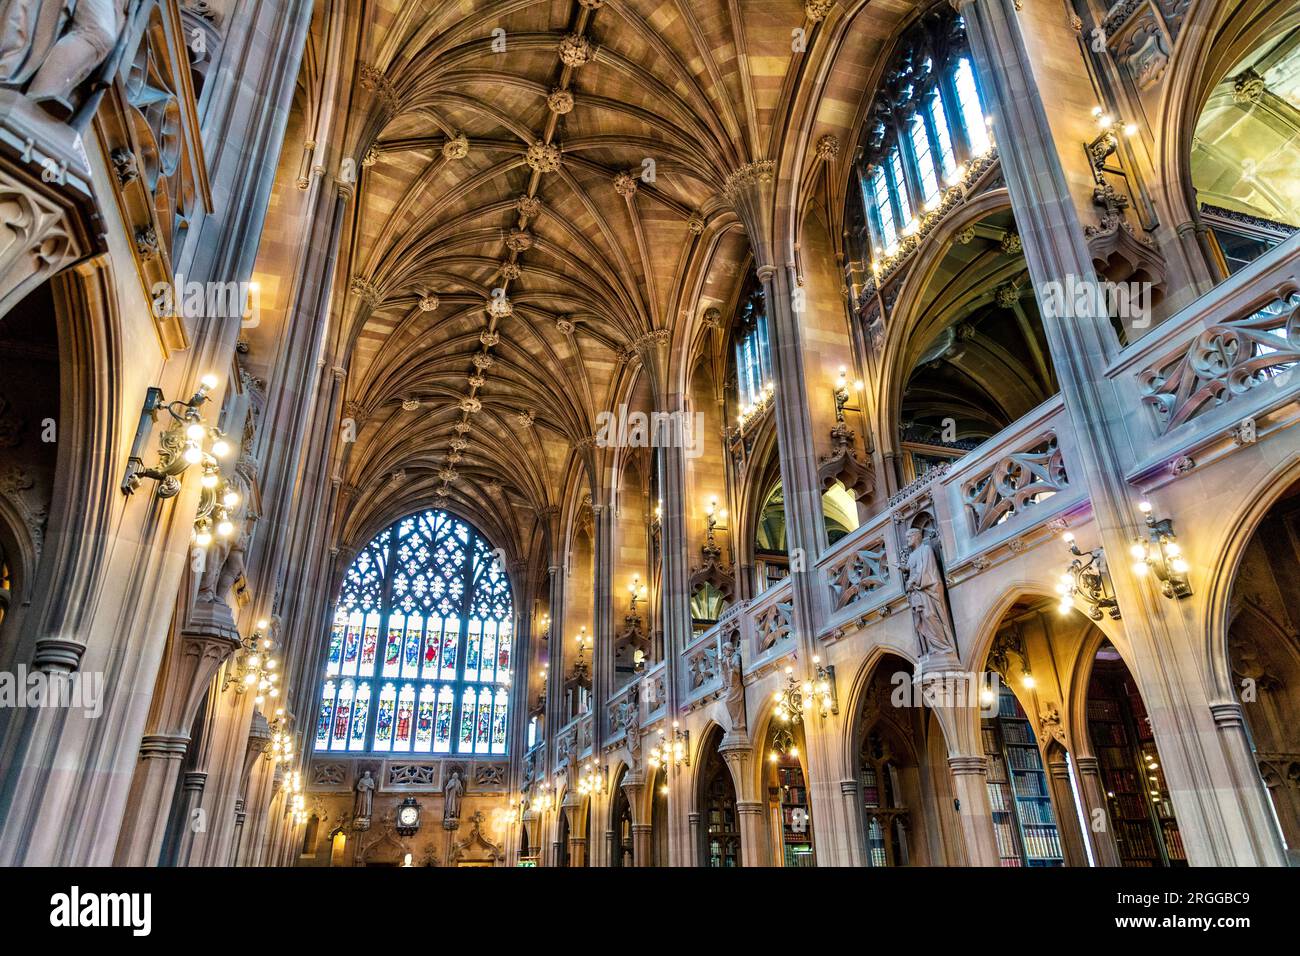 Vaulted ceiling of historic reading room of John Rylands Library, Manchester, UK Stock Photo